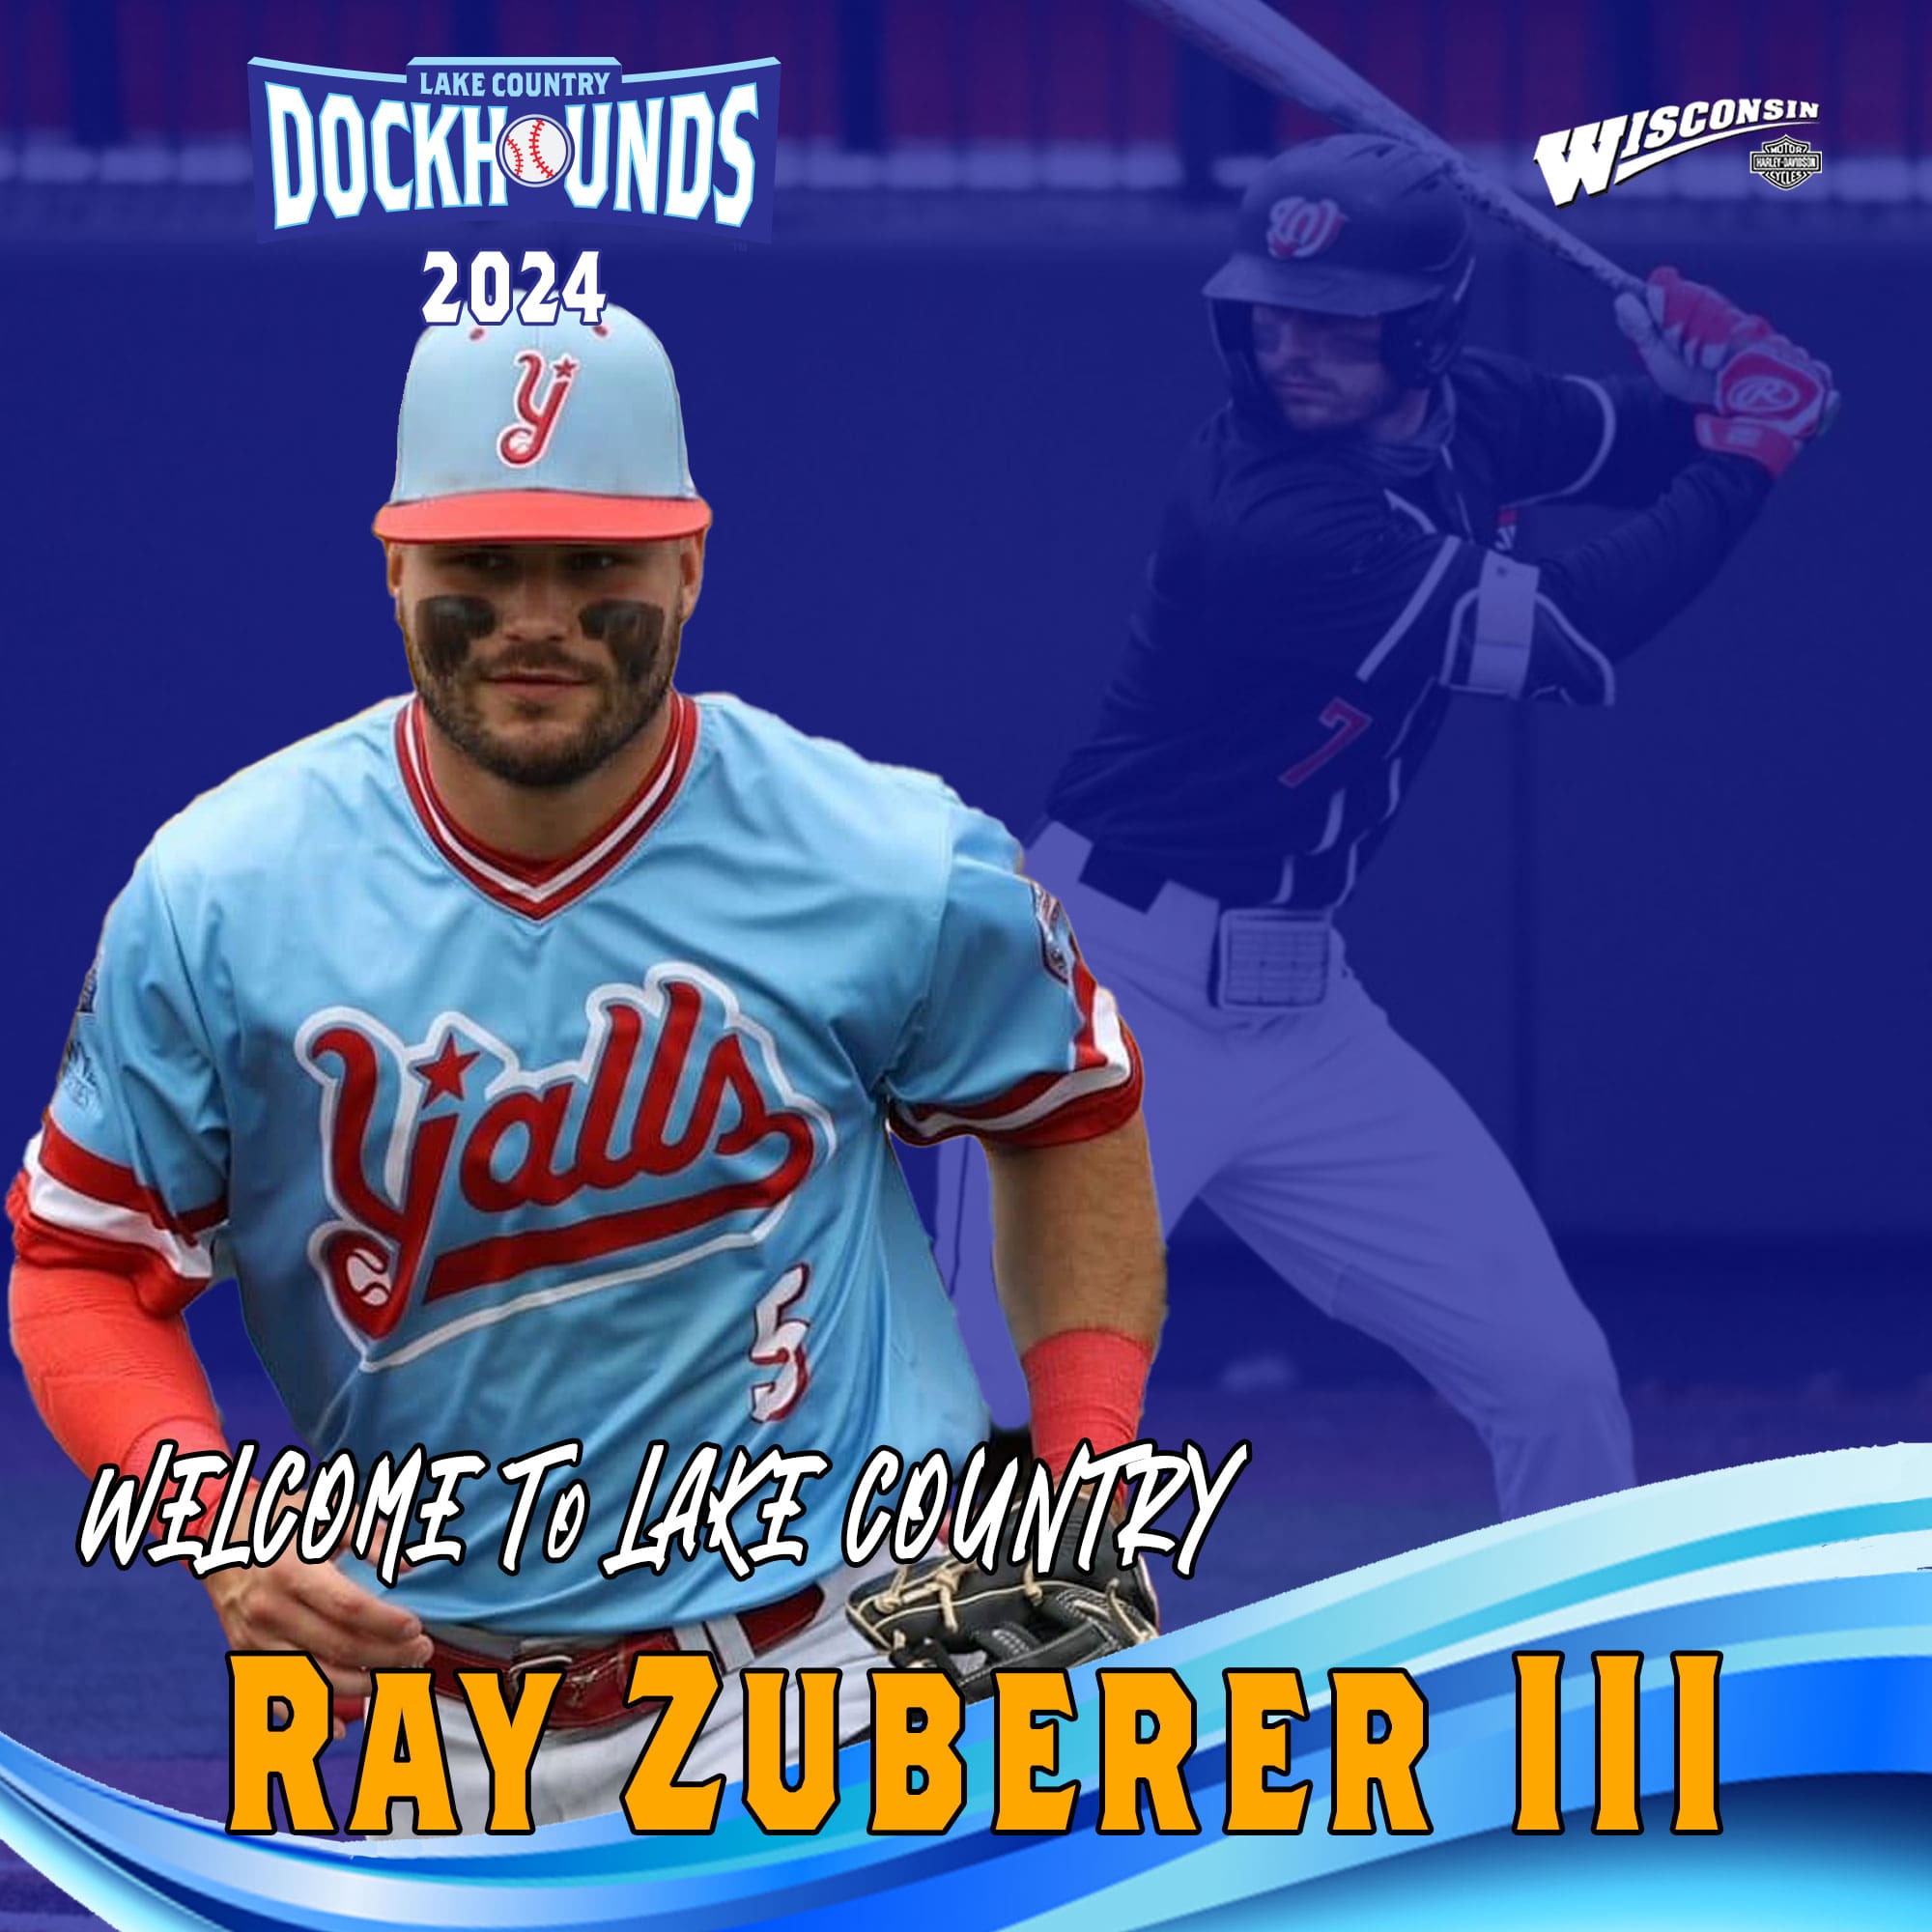 Welcome Ray Zuberer